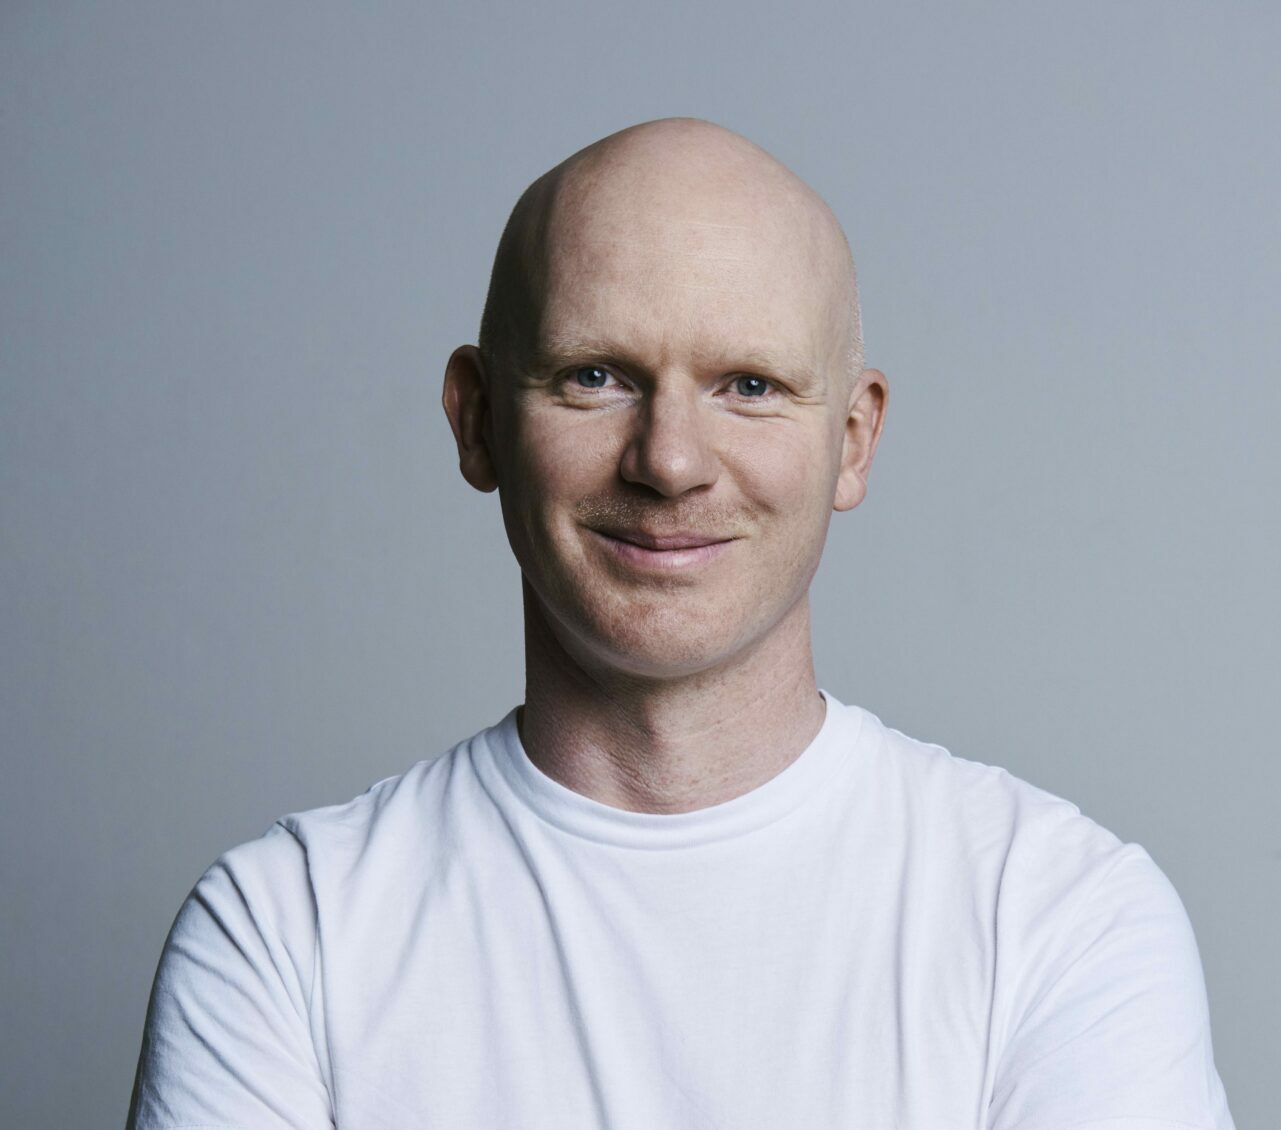 A man in a white t-shirt with a shaved/bald head stands arms folded looking directly at the camera and smiles